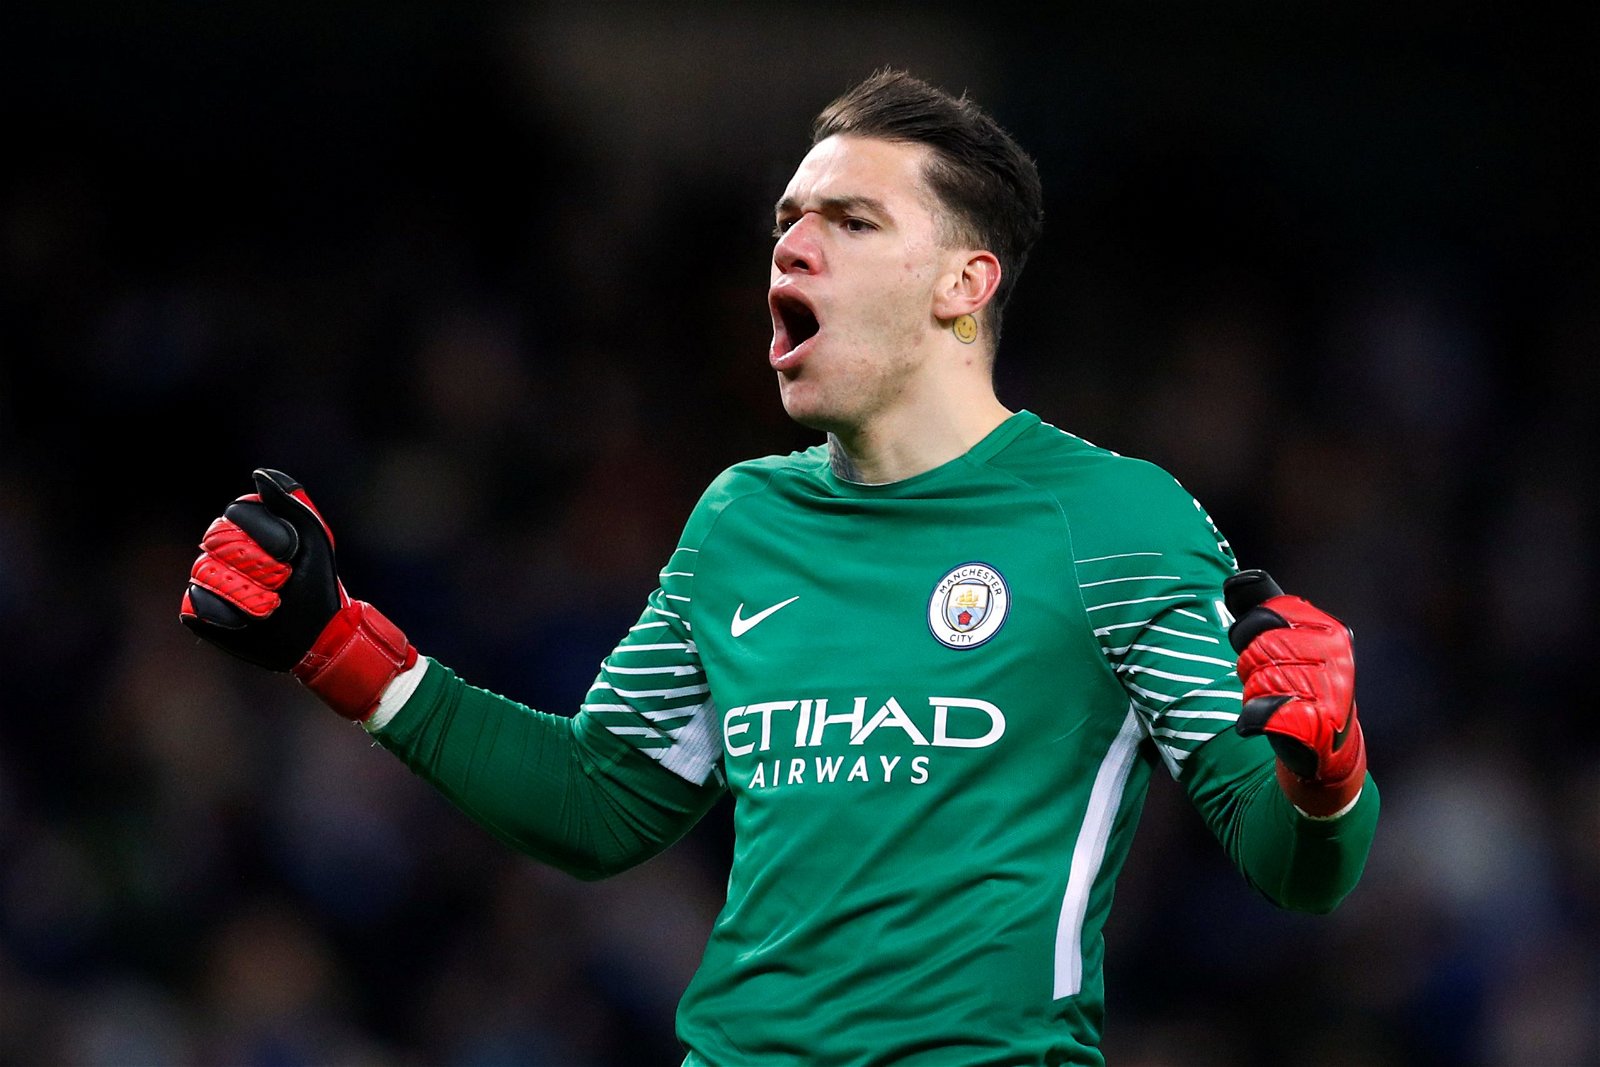 Top Five tallest Manchester City players - Ederson